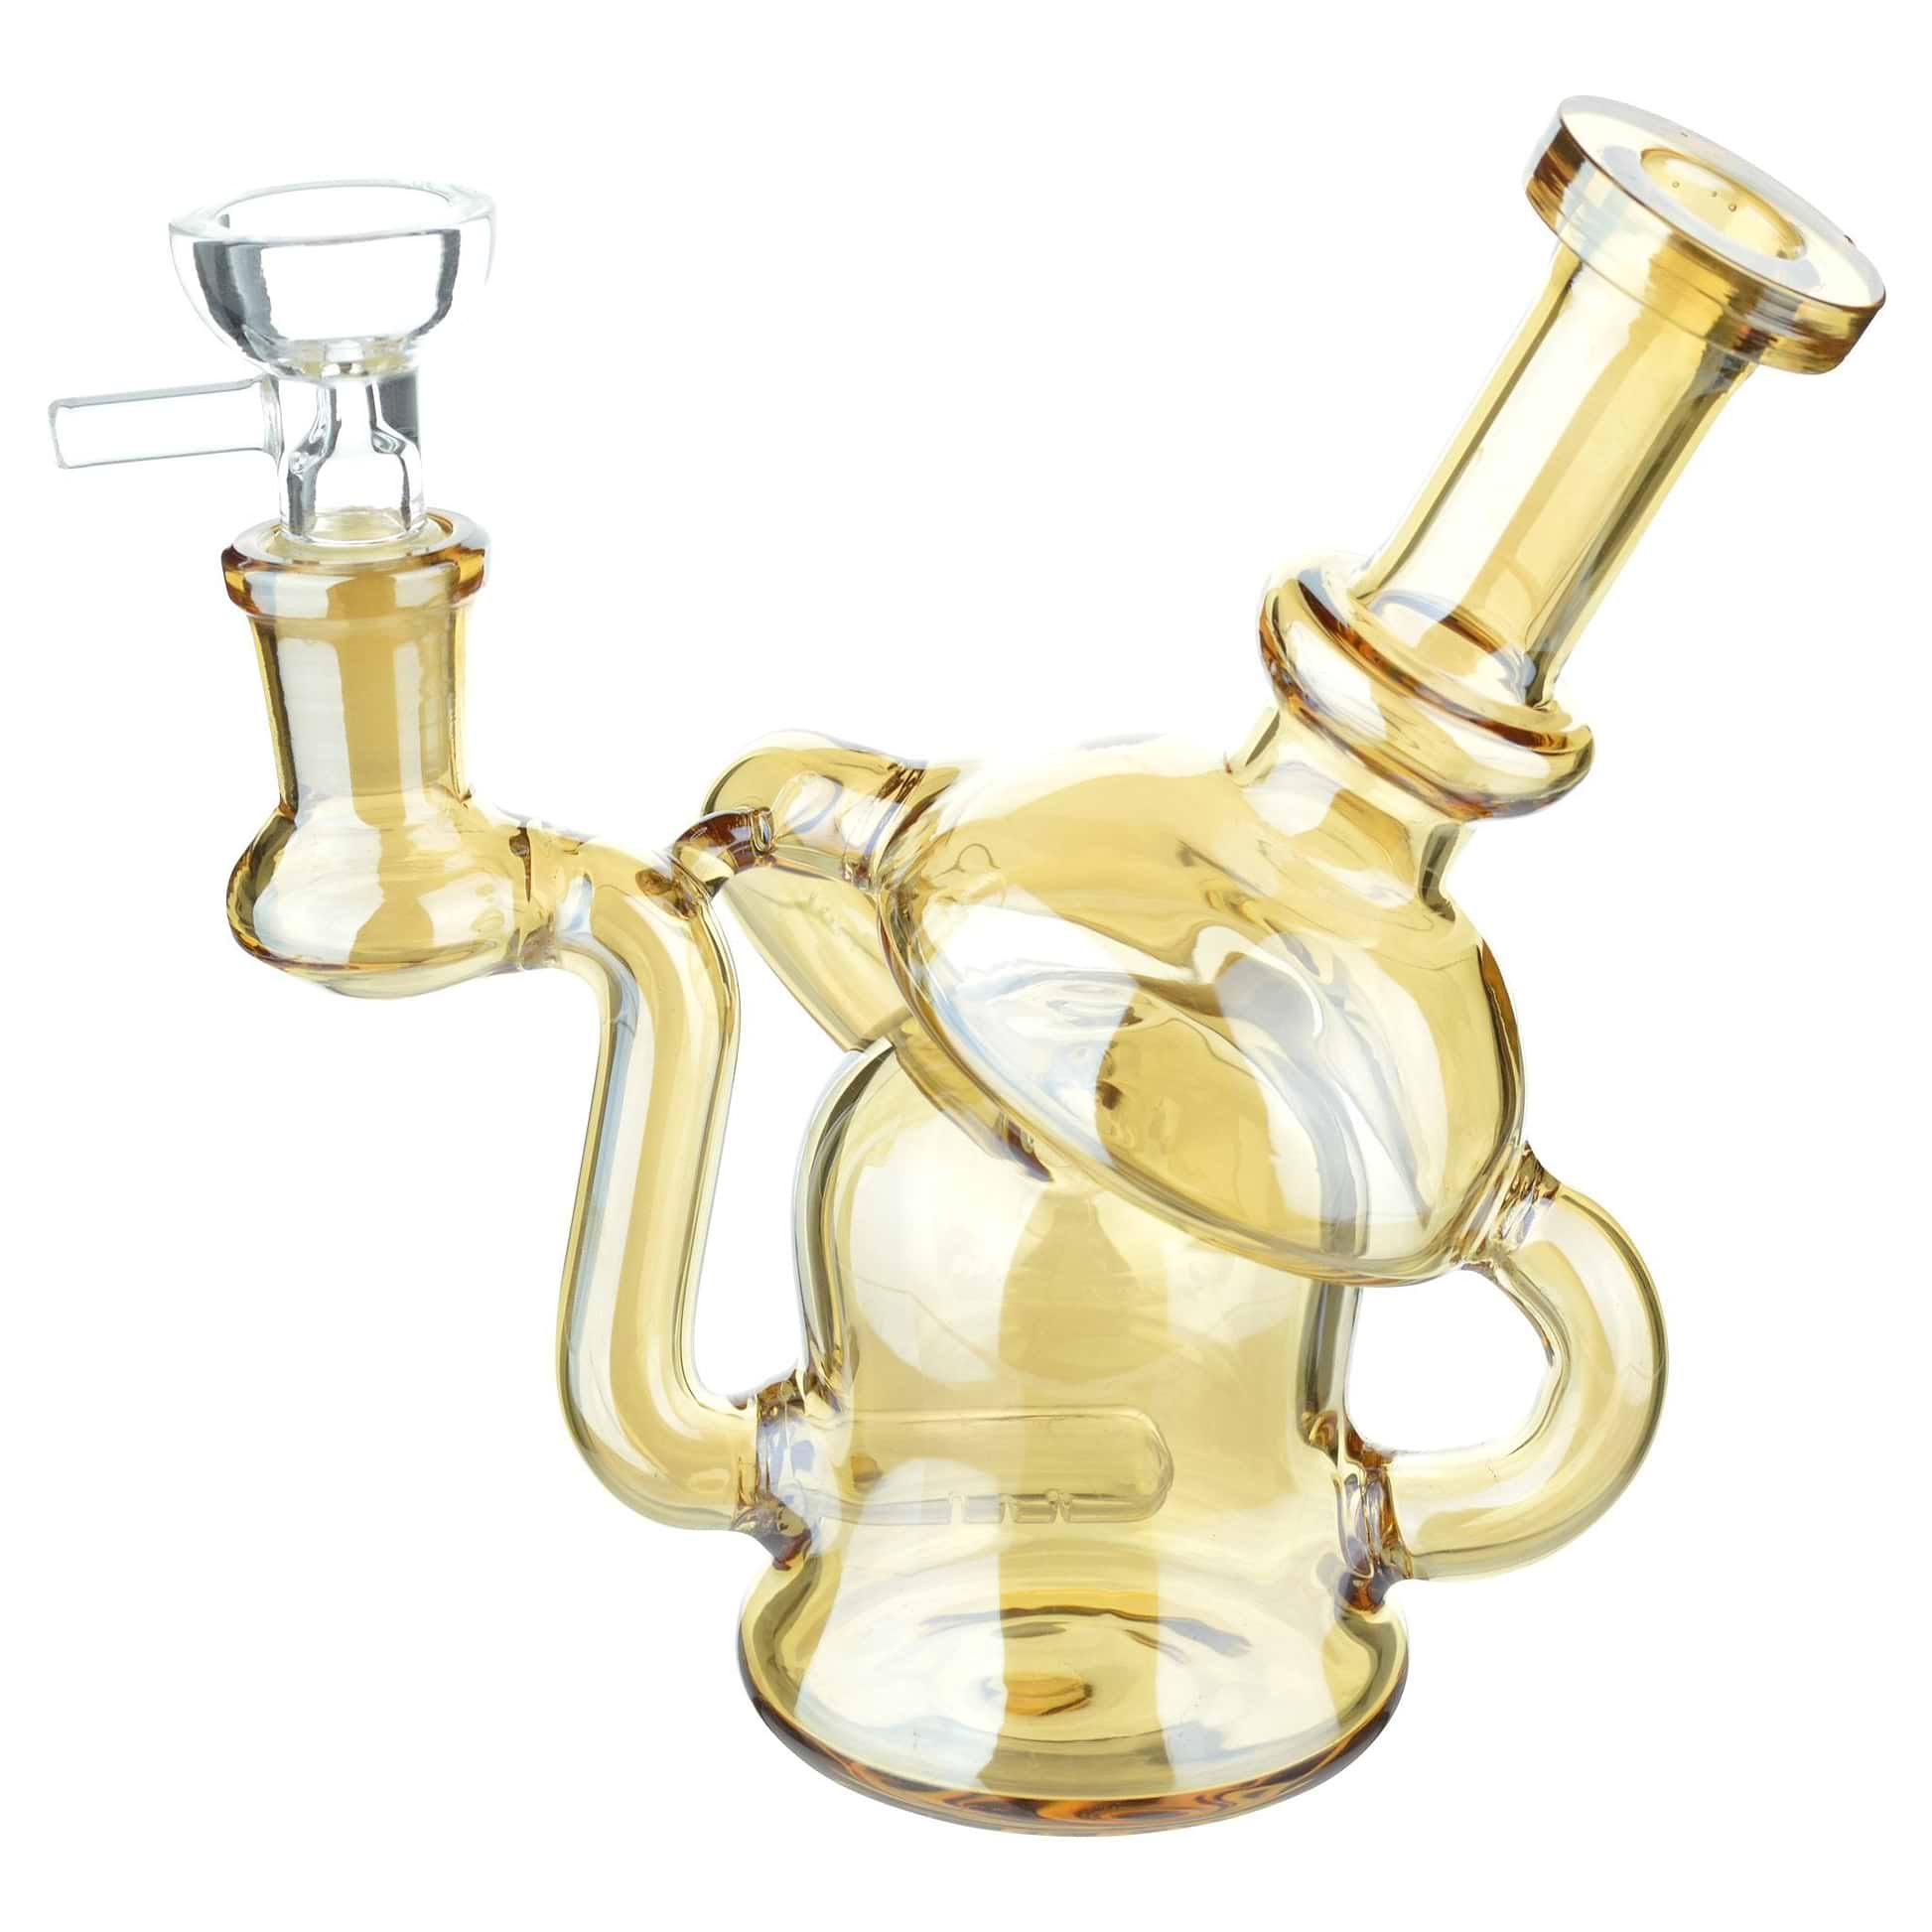 Full body shot of 6-inch glass multichambered bong smoking device mouthpiece facing right in copper color